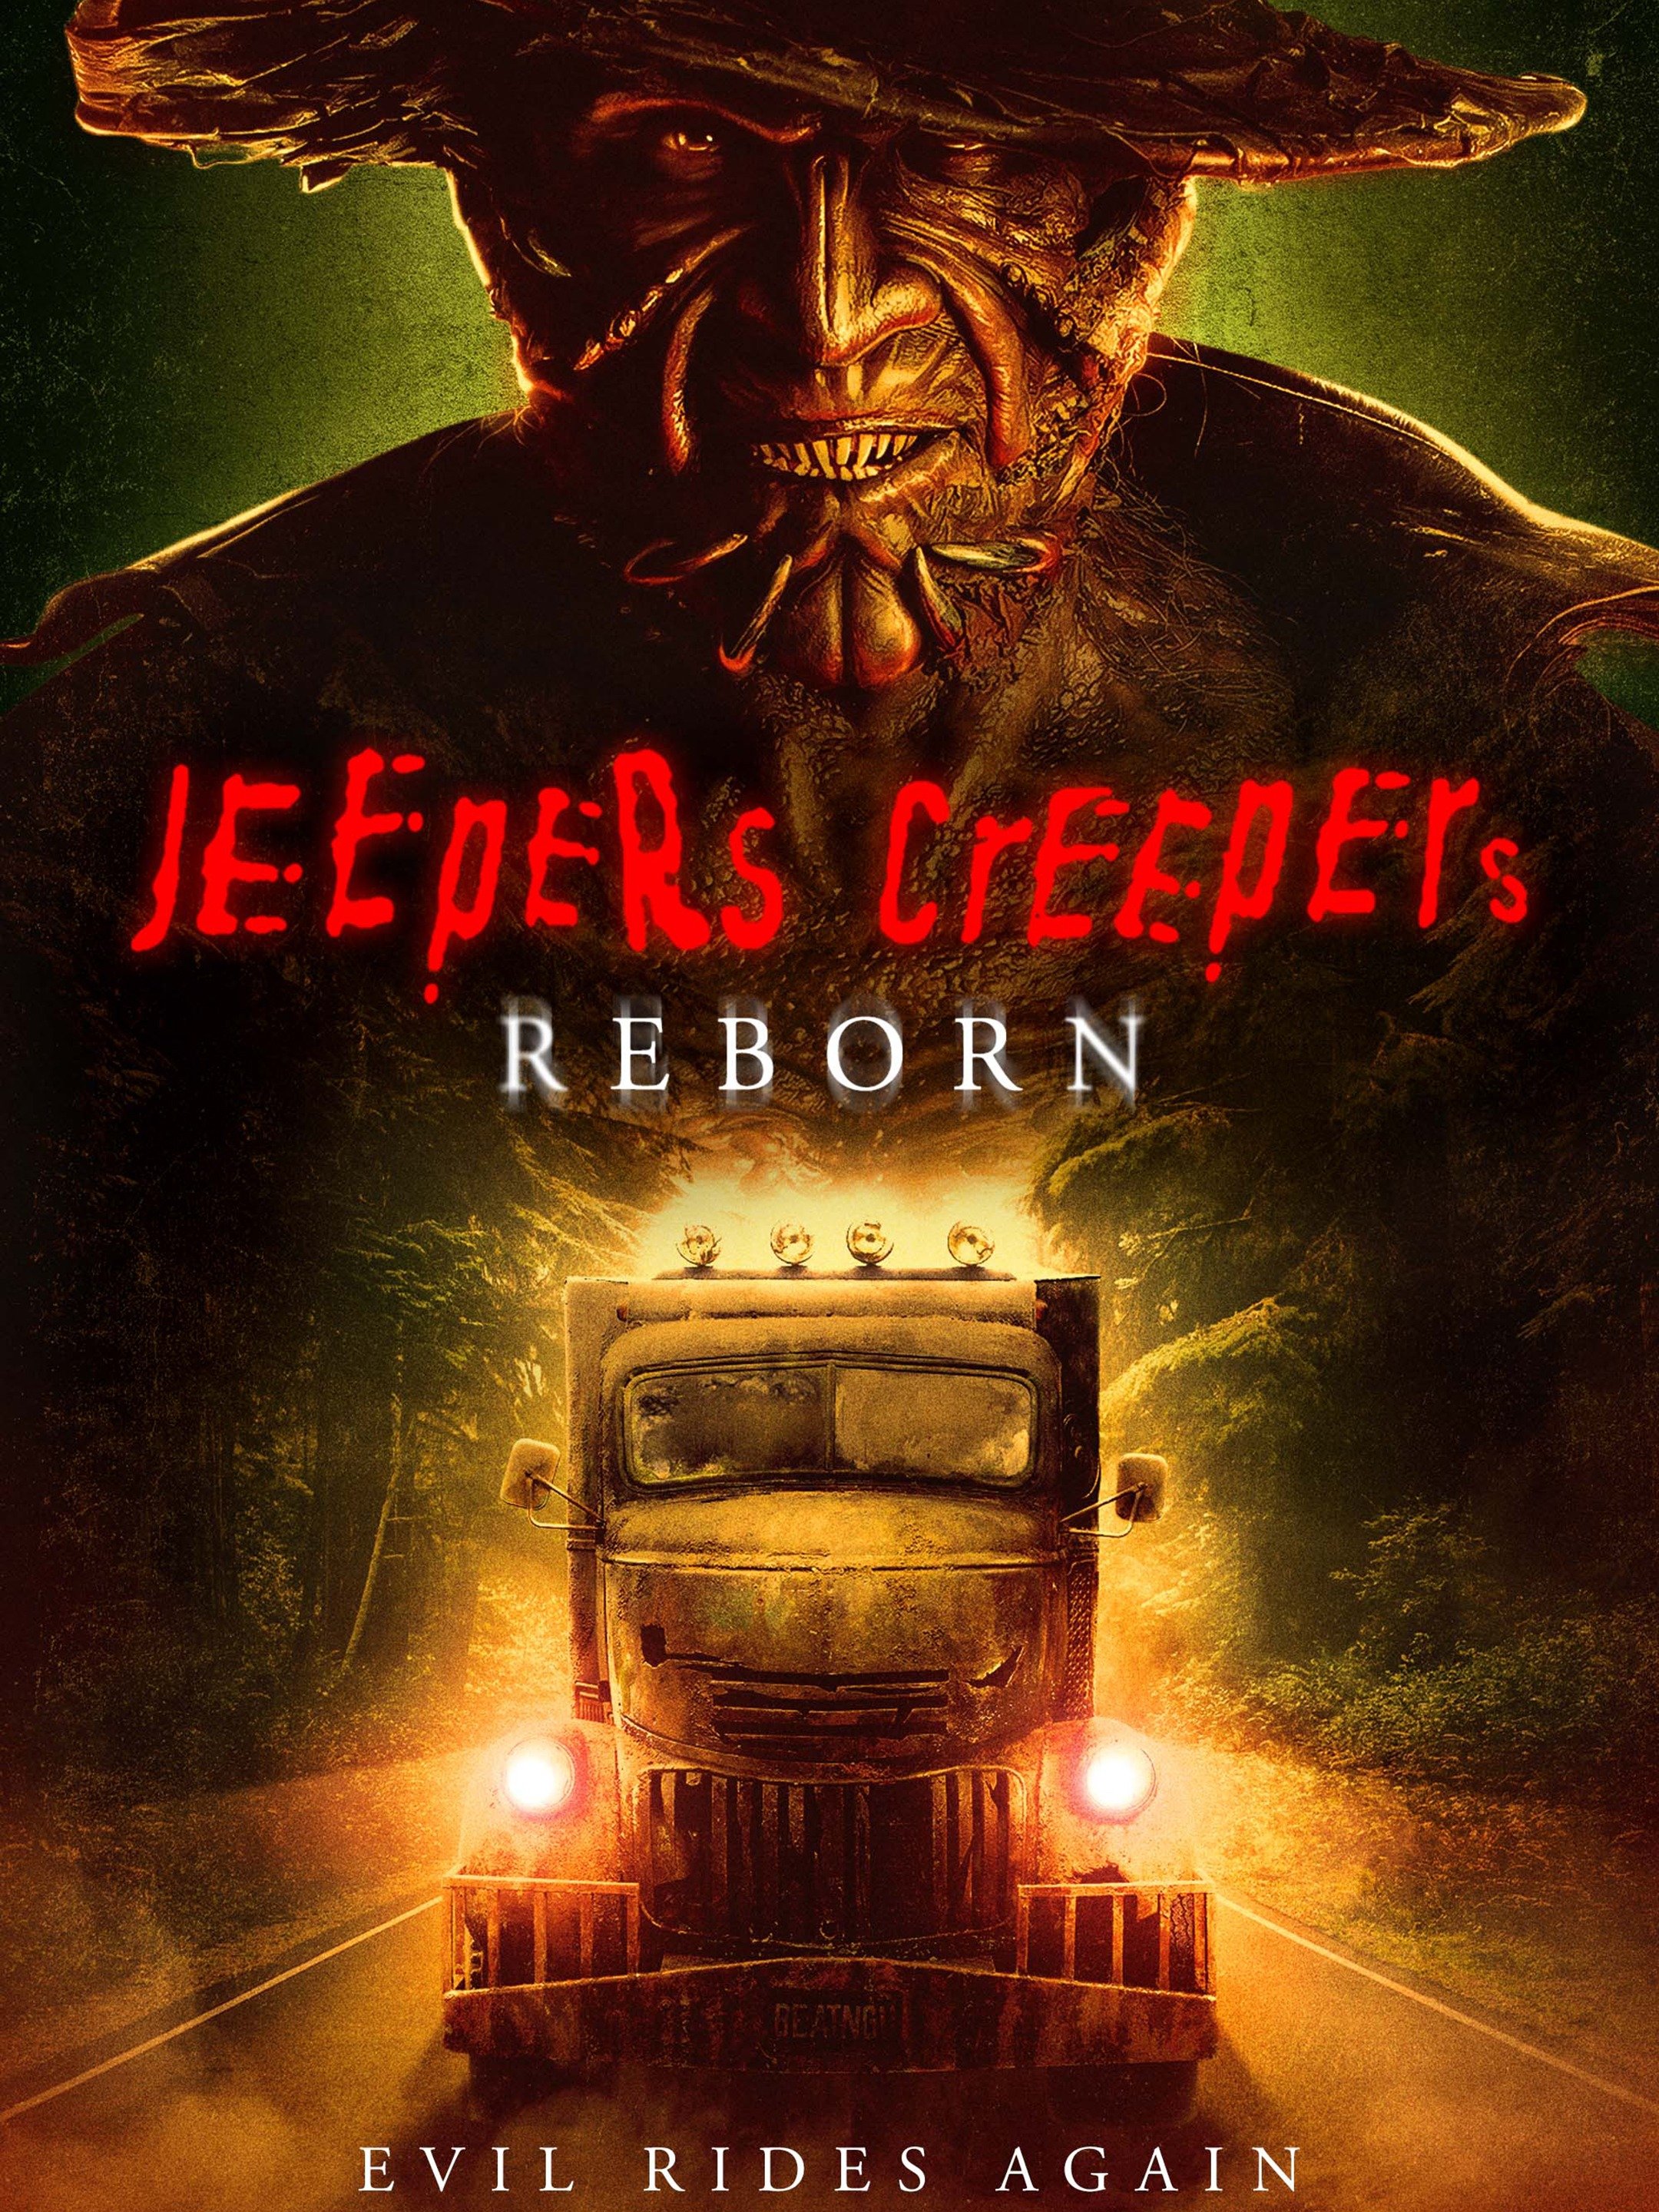 Jeepers creepers reborn free download how to download pcsx2 games for pc